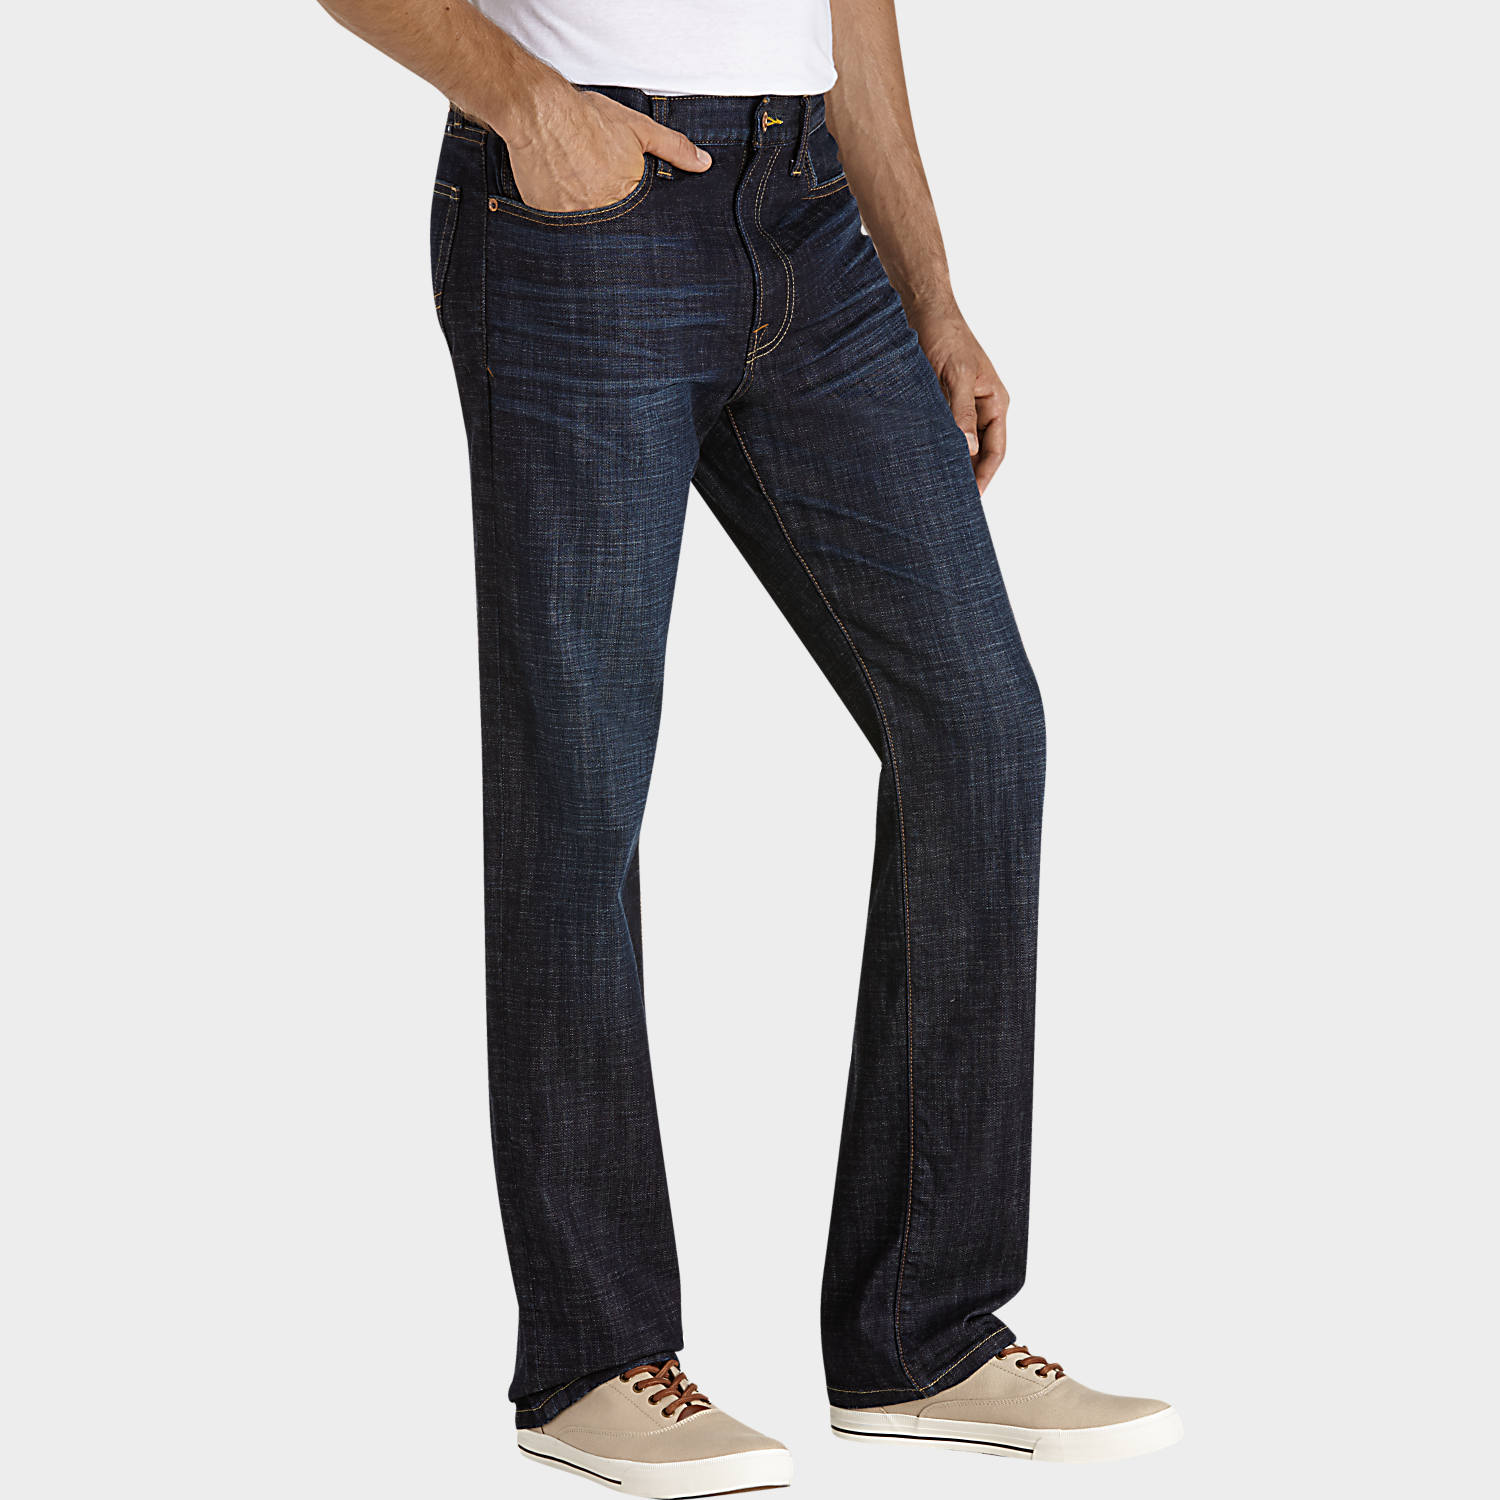 Enhance your style by picking right pair of men jeans